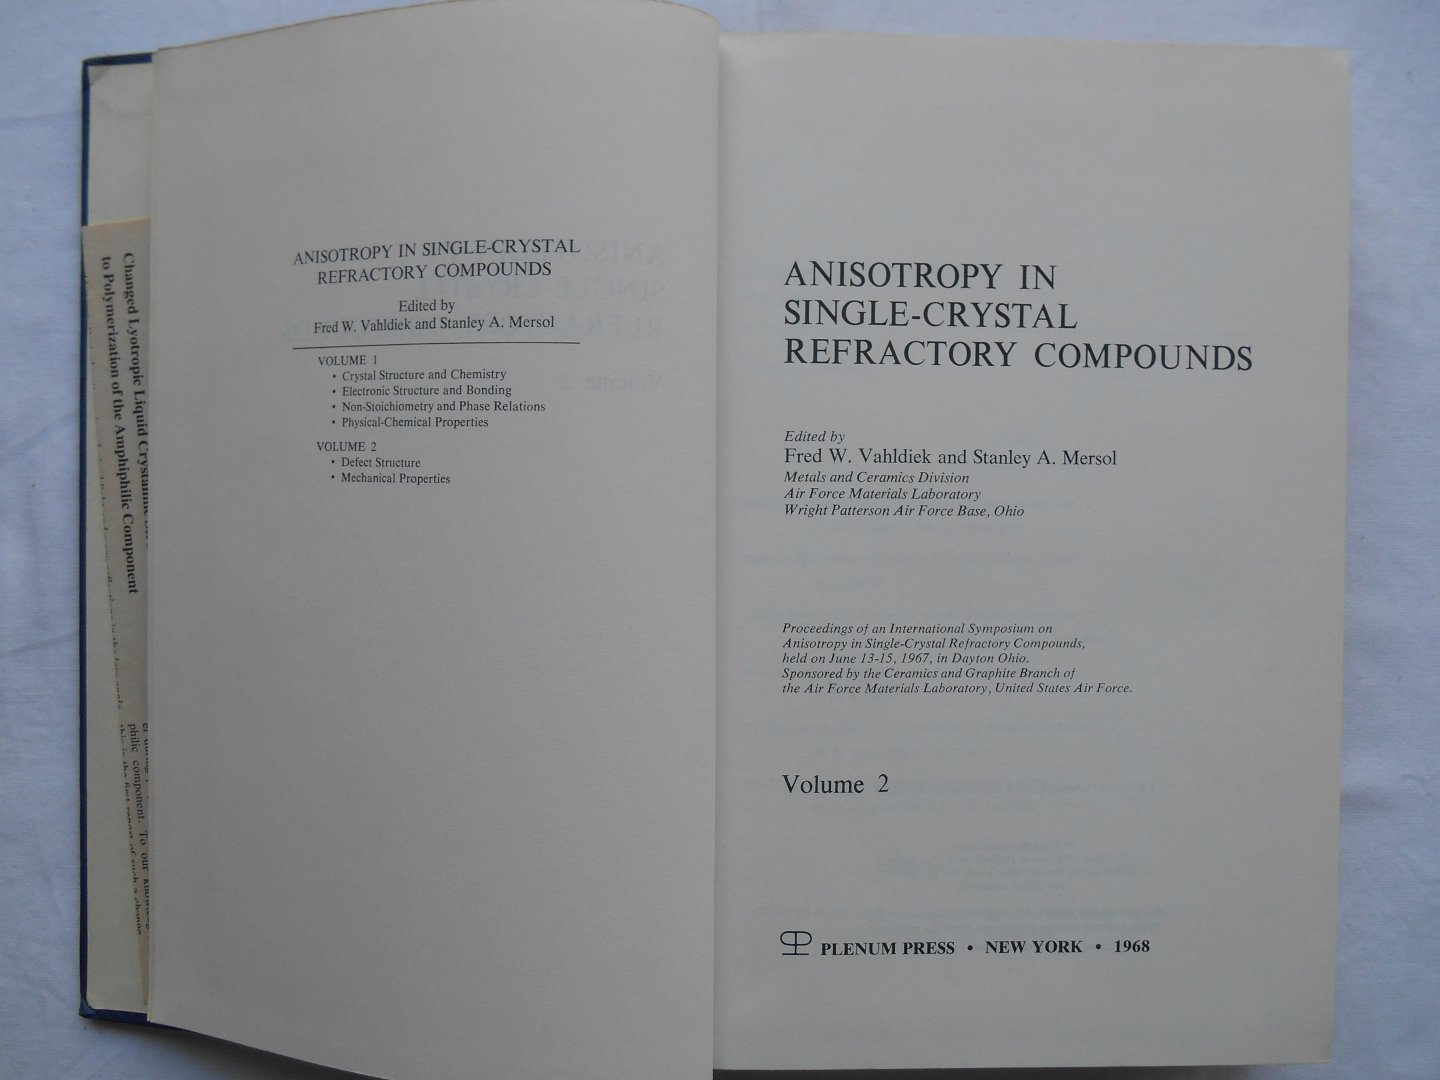 Vahldiek, Fred W. & Mersol, Stanley A. - Anisotropy in Single-Crystal Refractory Compounds, volume 2